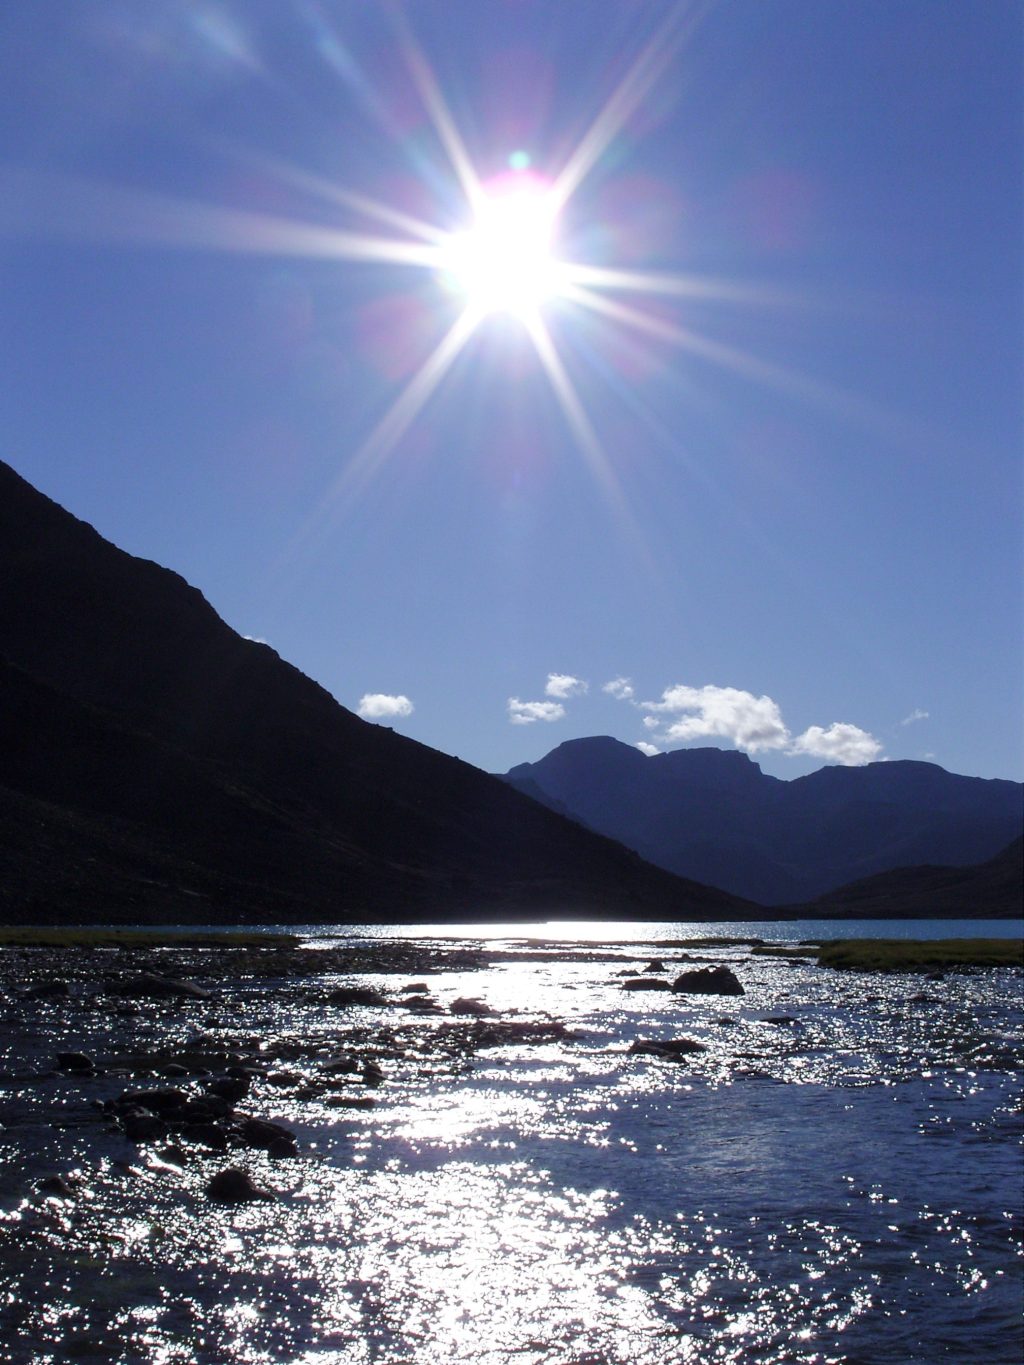 A body of water with mountains in the background and the sun shining brightly